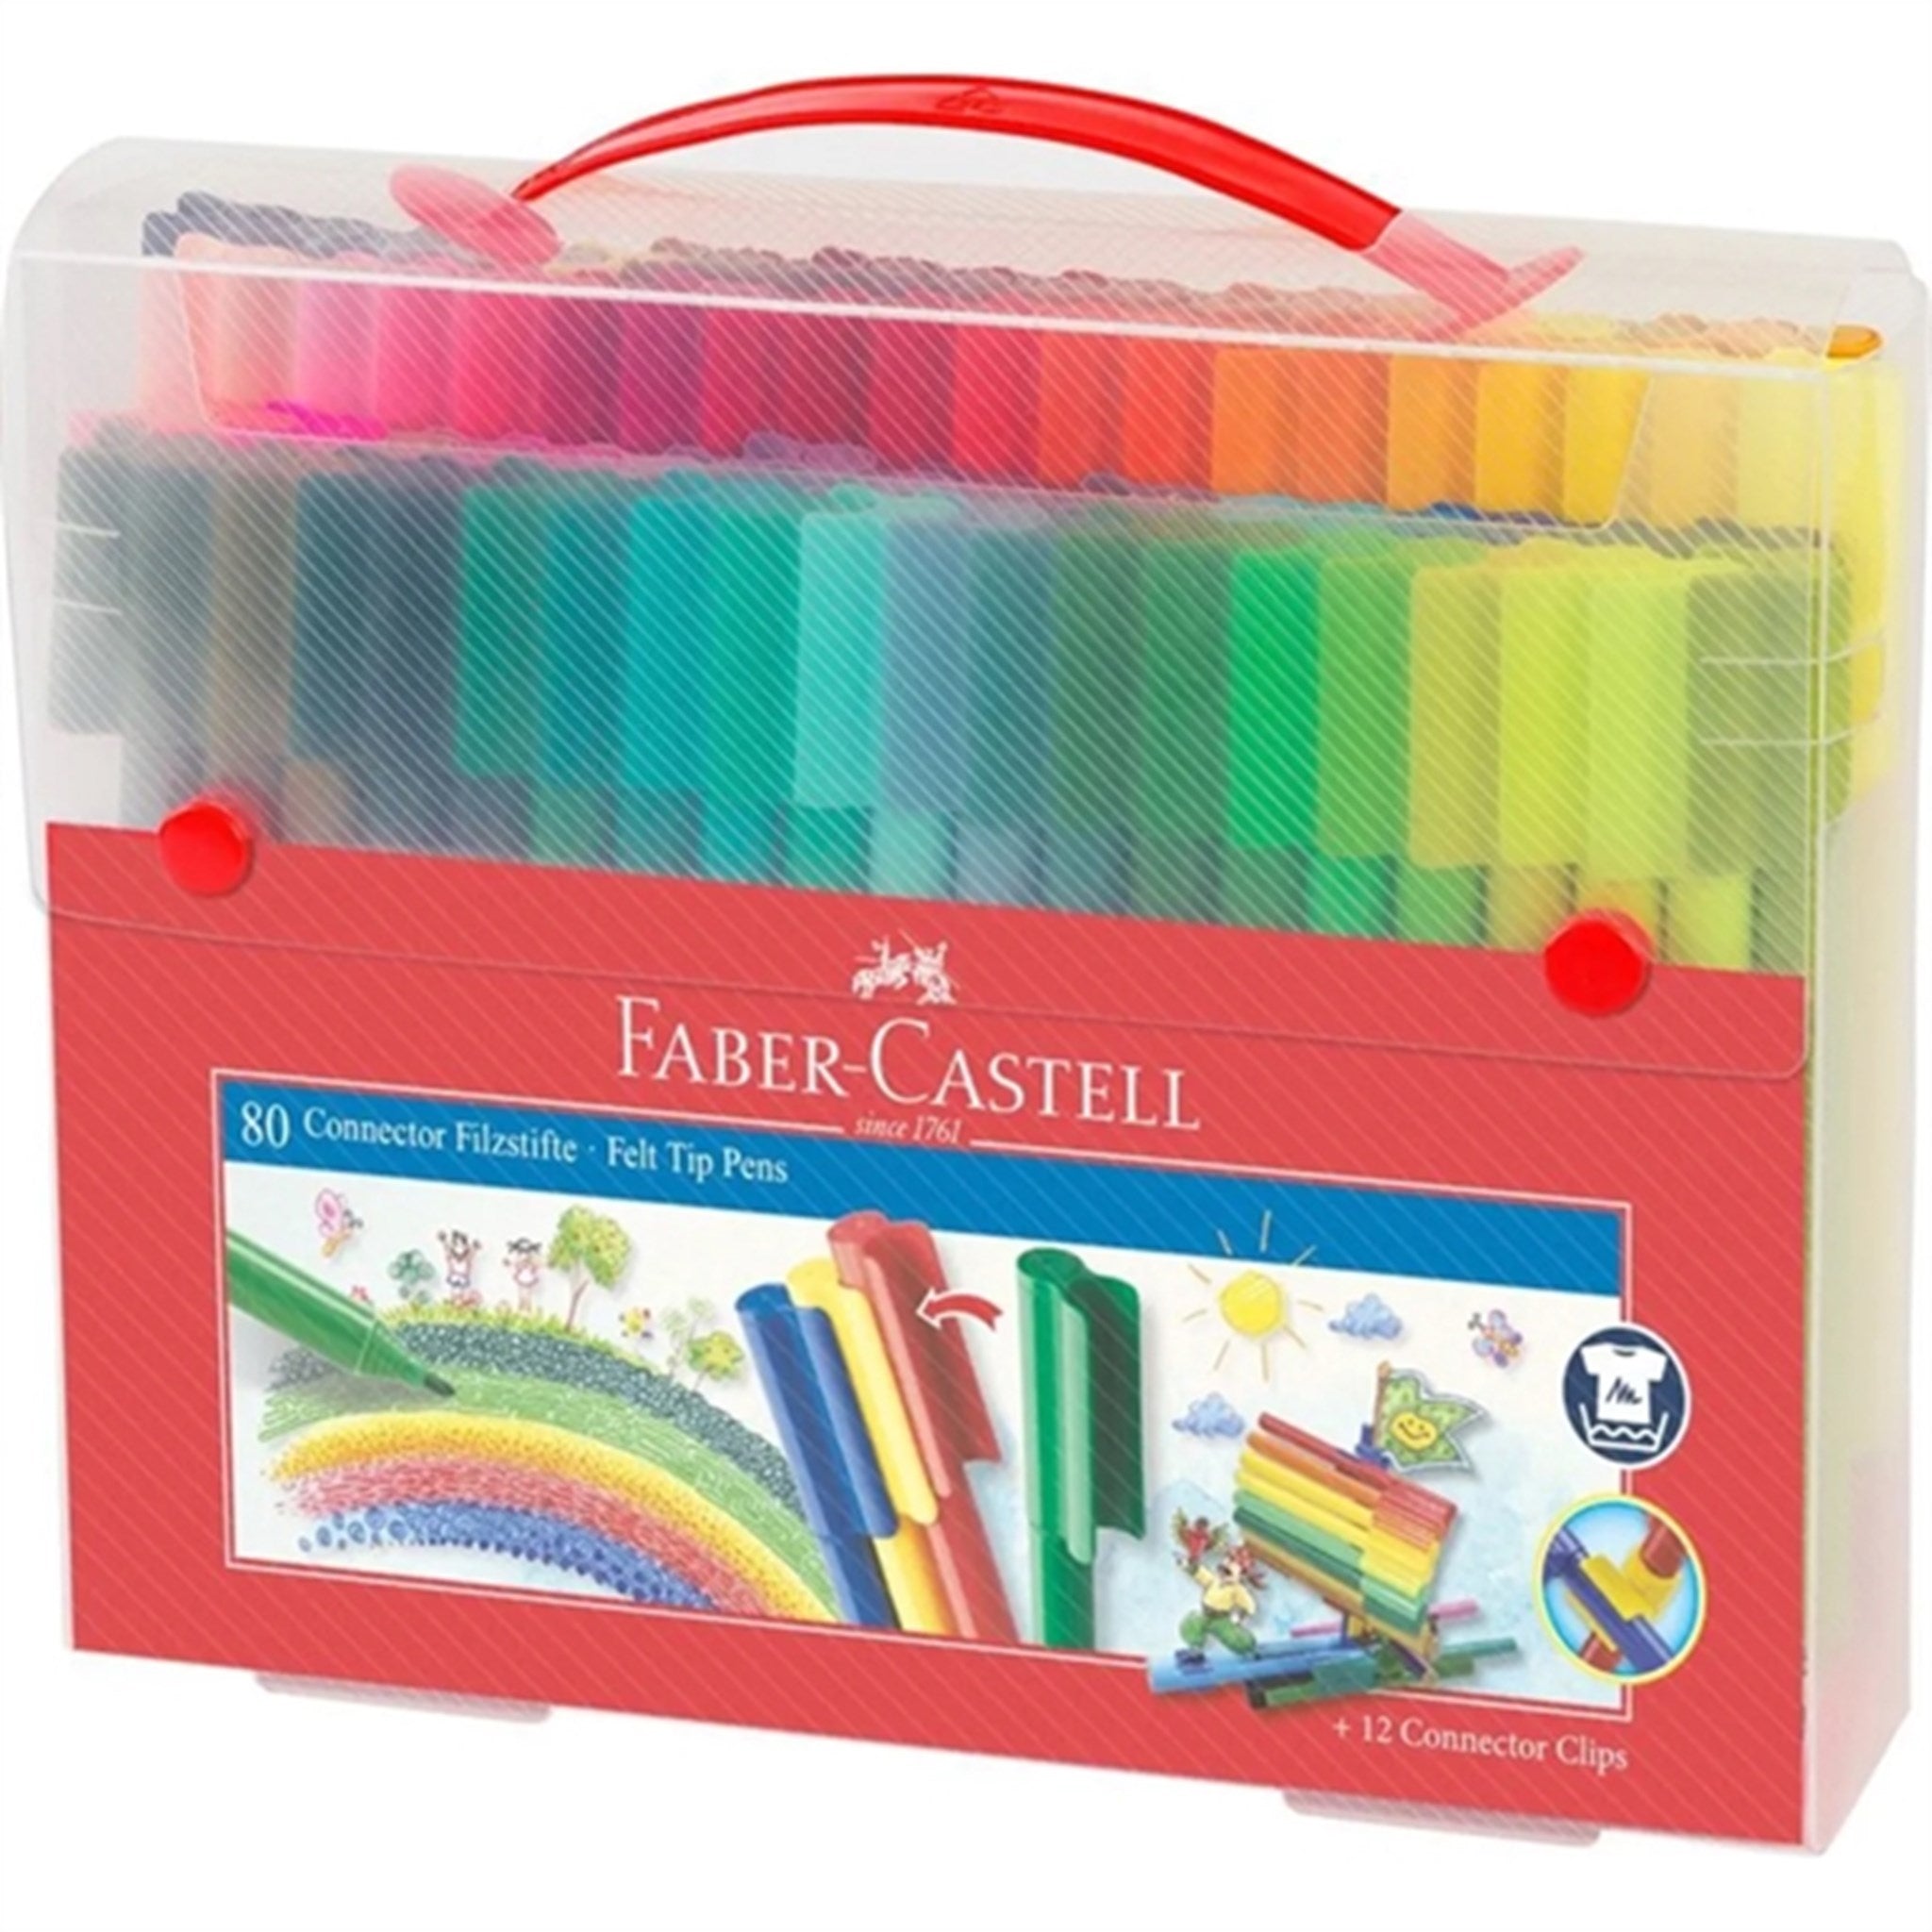 Faber Castell Markers Connector Suit Case 80 pc